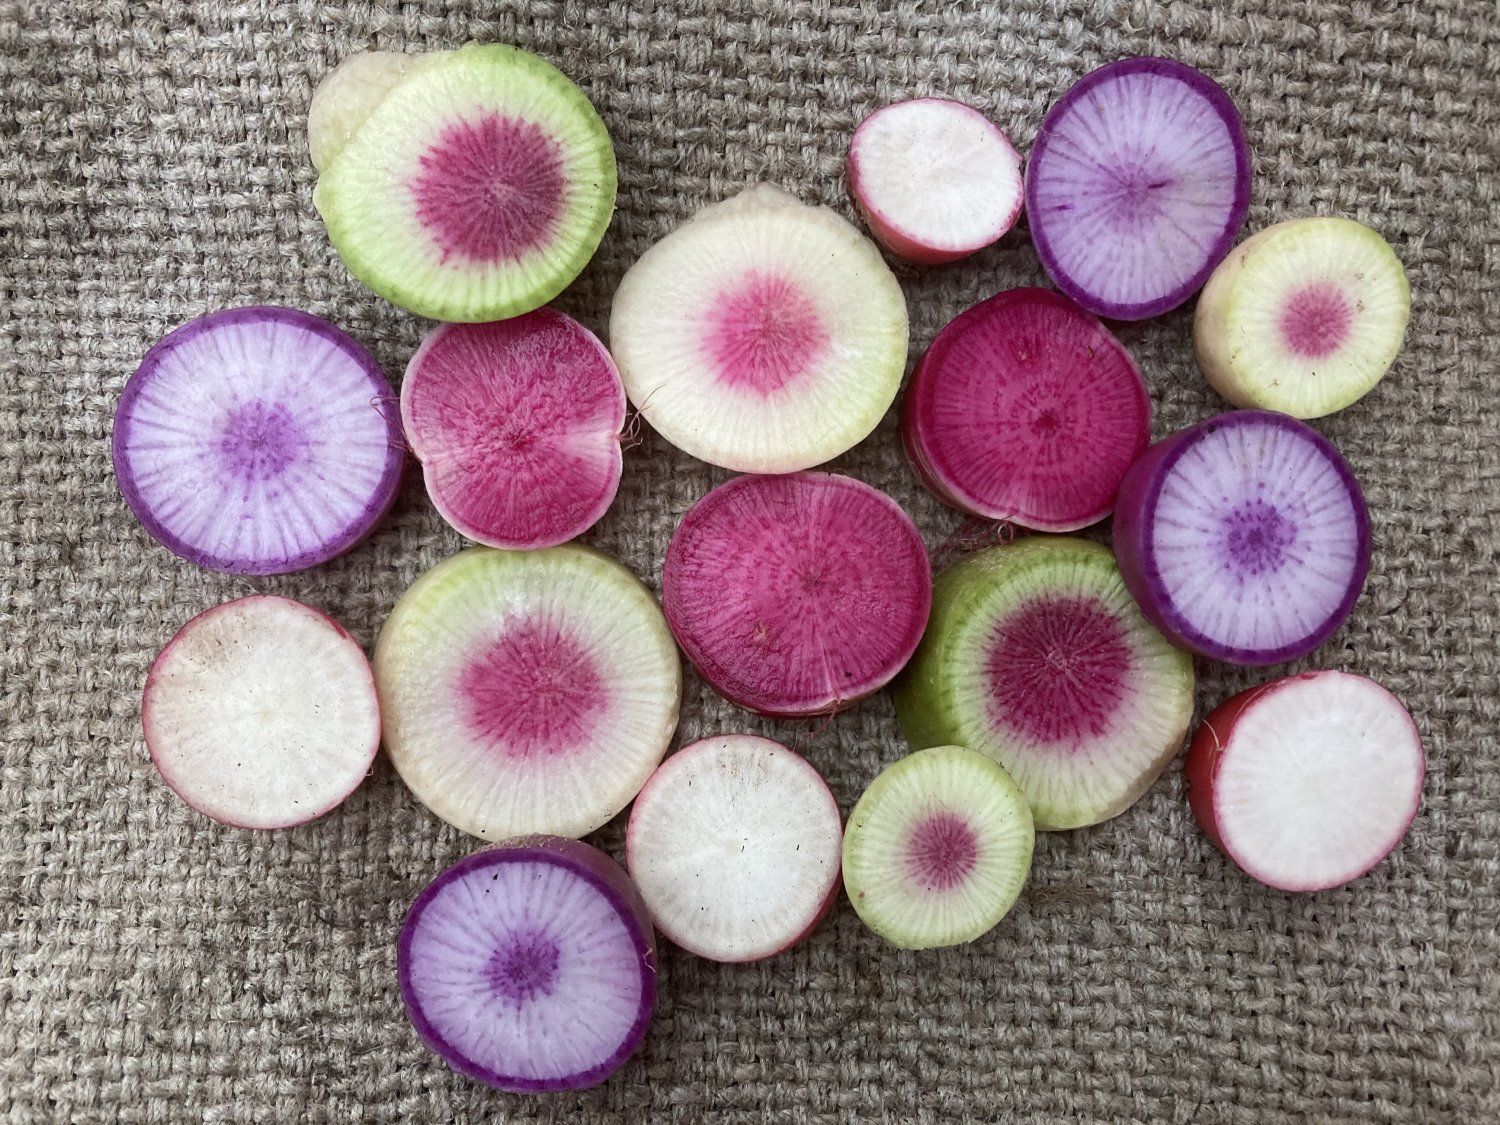 Next Happening: All About Radishes!